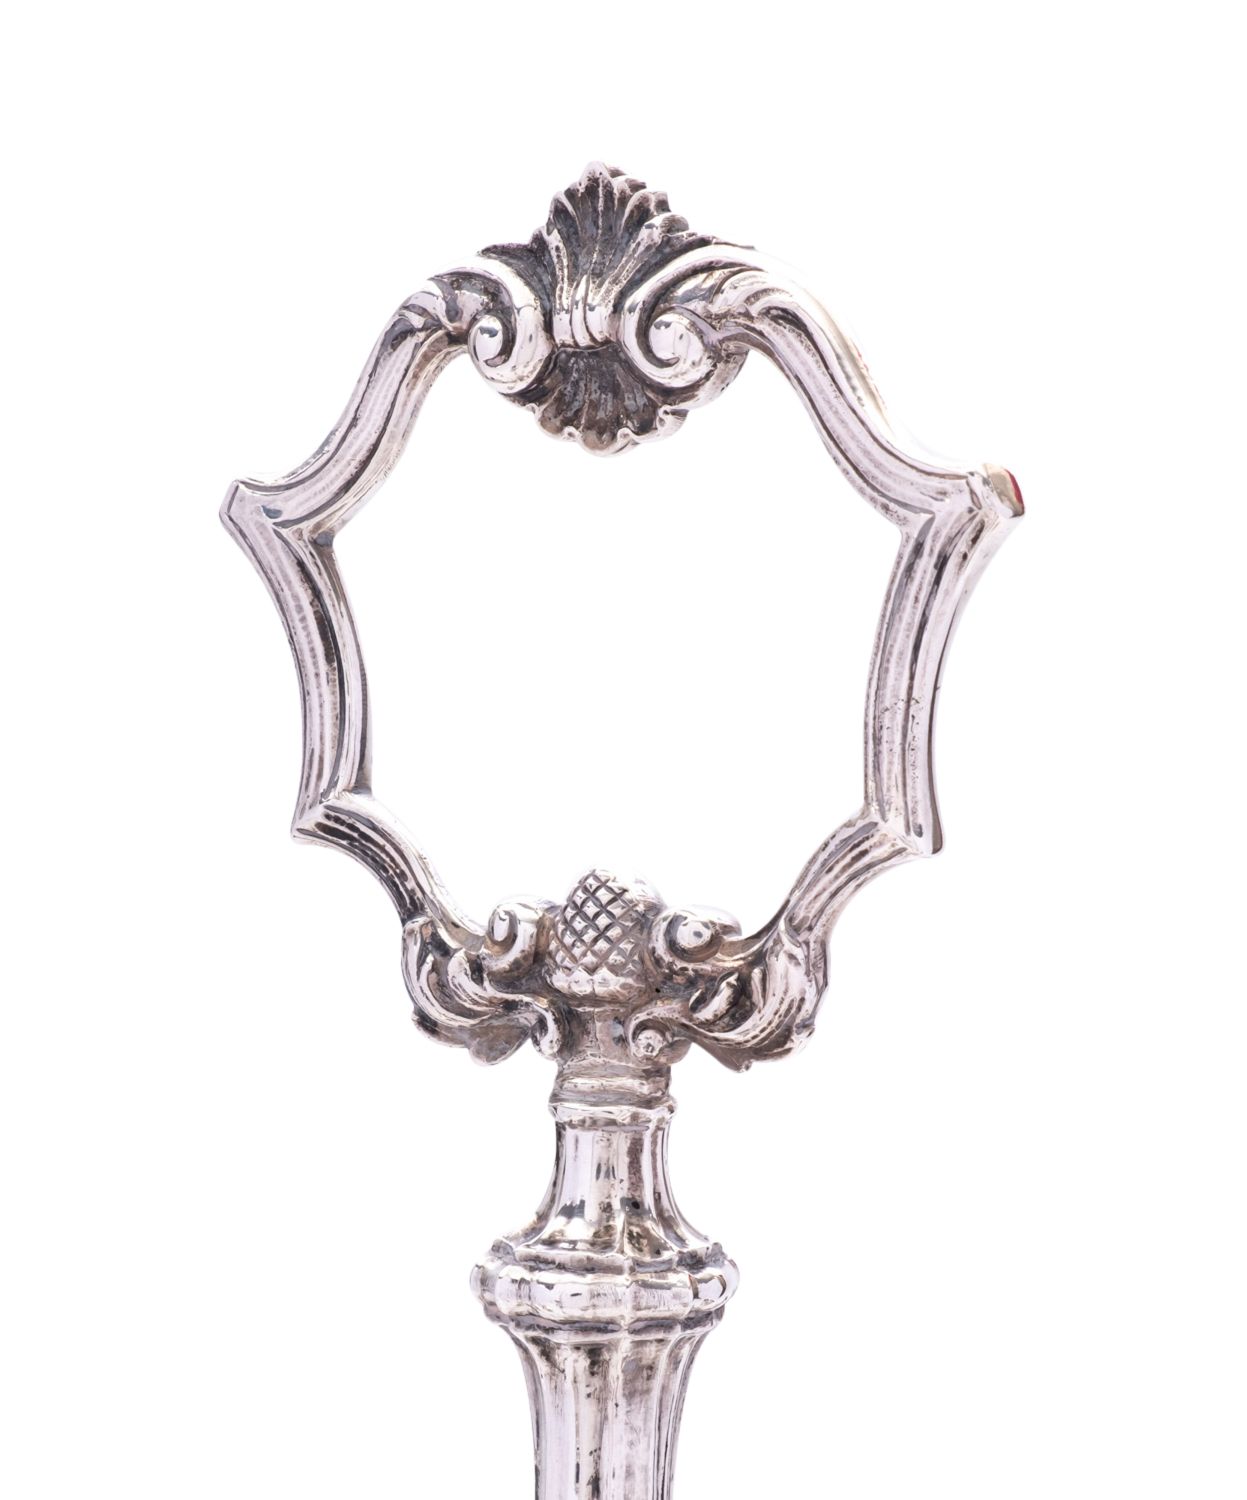 An Italian eight branch silver candelabra by Ilario Pardella, Milian 1944- 1955, stamped 800, - Image 3 of 4